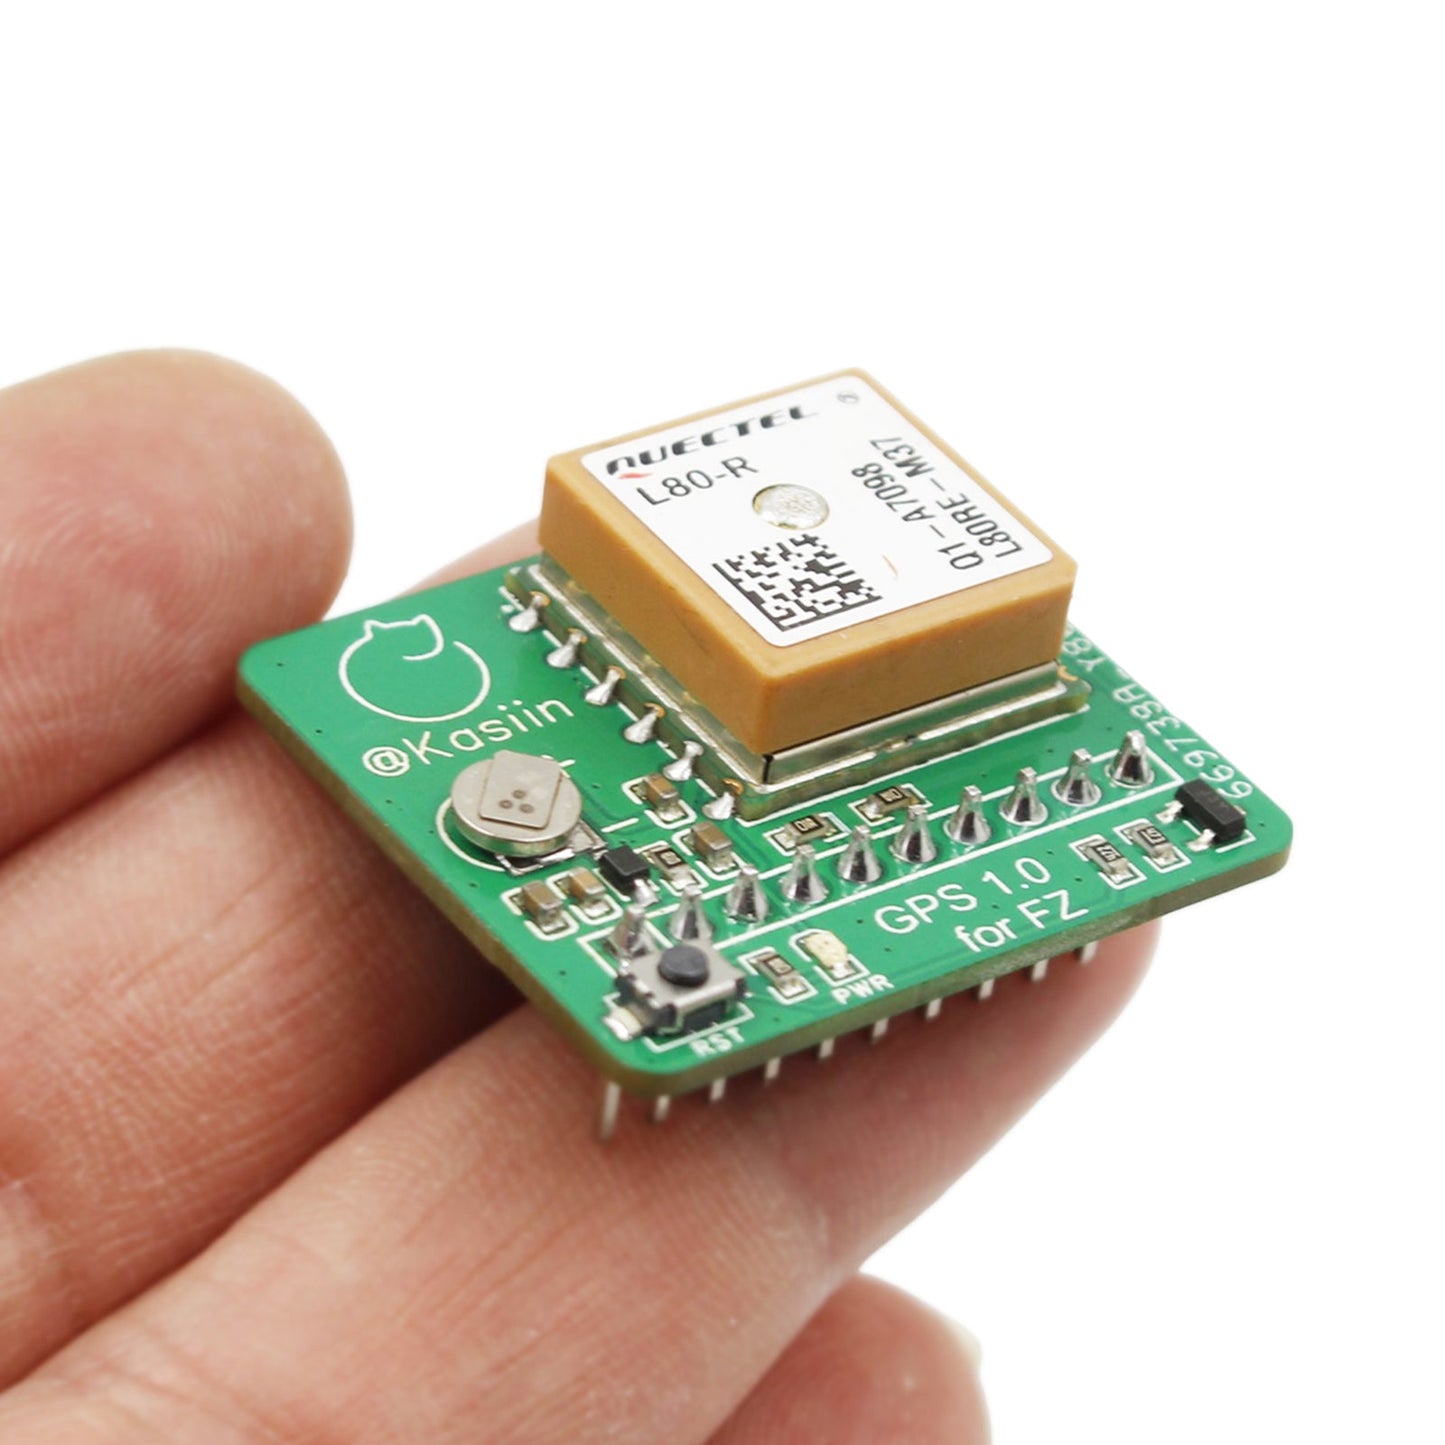 New GPS Module Uses Antenna Integrated Module Unleashed Firmware